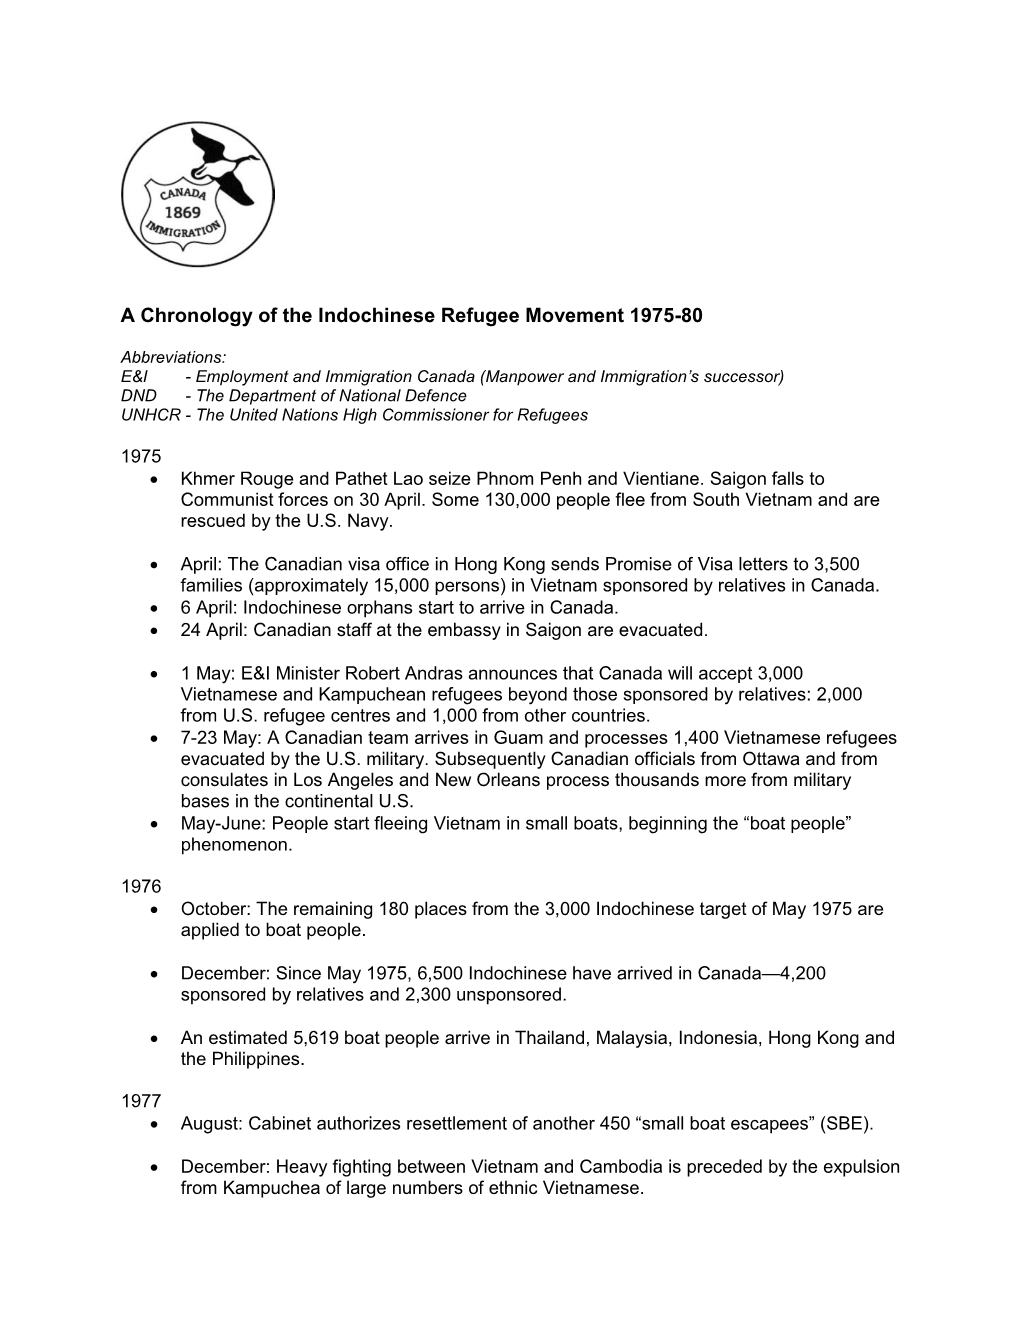 A Chronology of the Indochinese Refugee Movement 1975-80